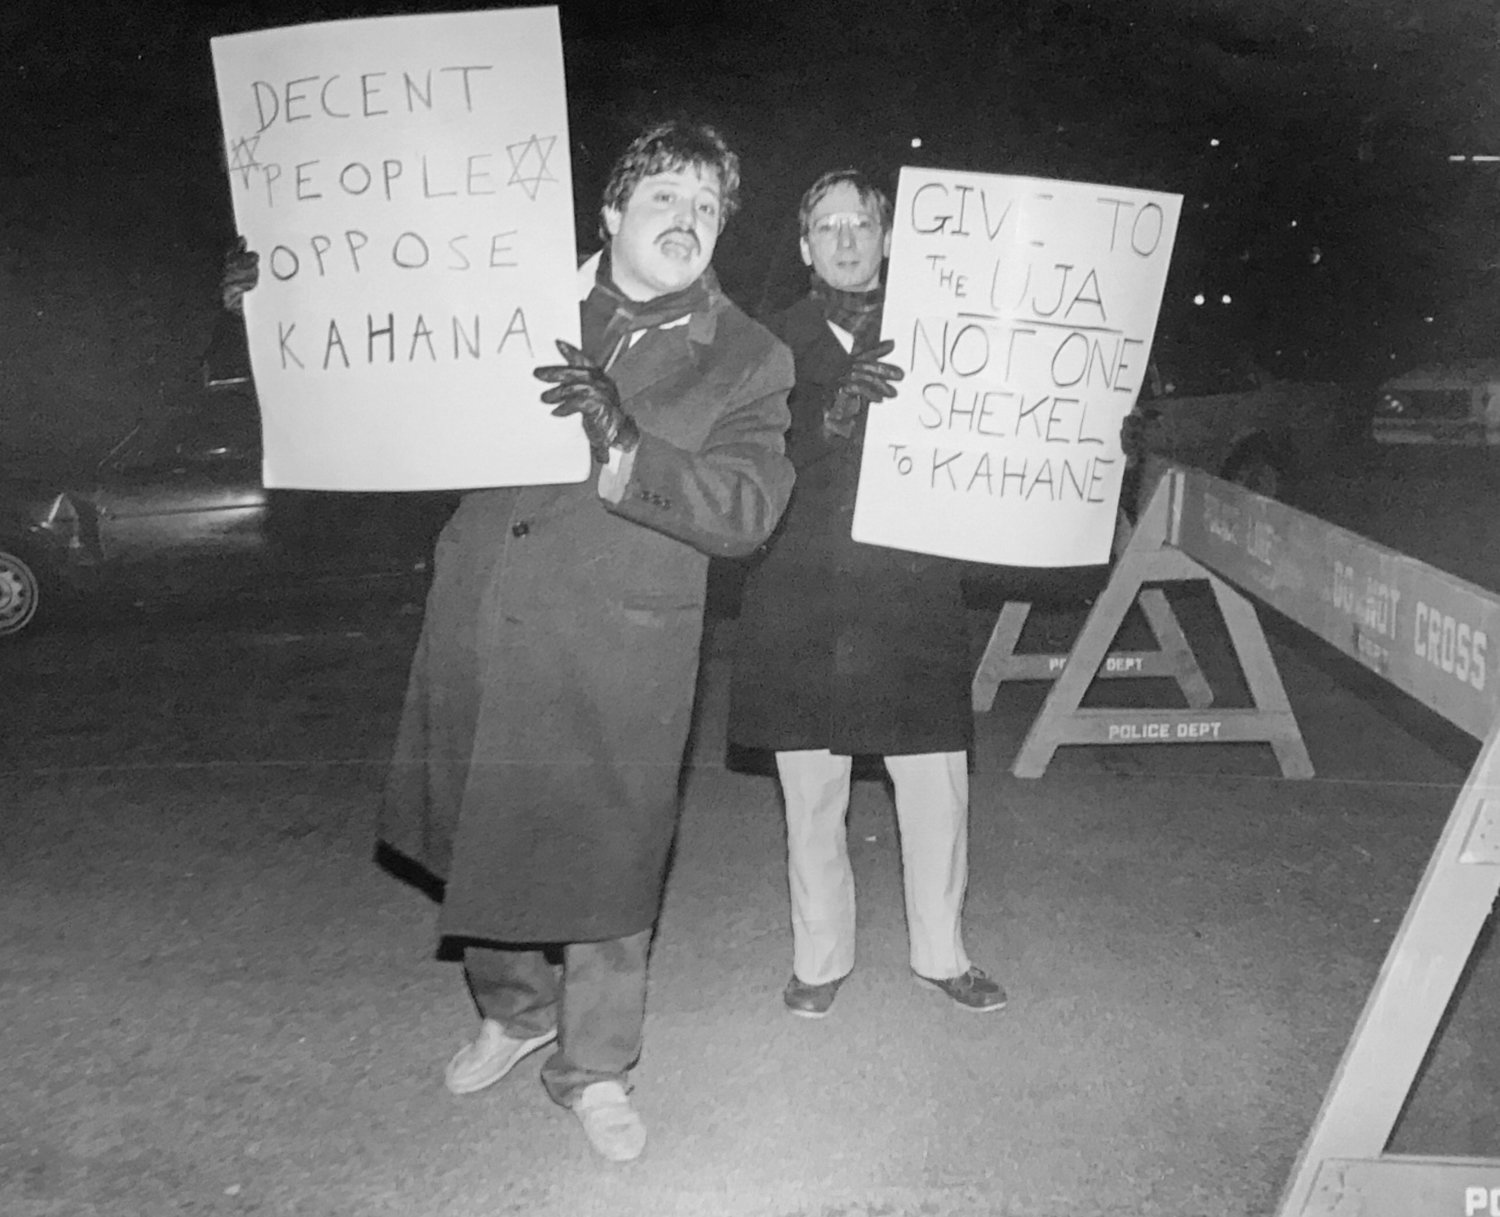 A 1988 debate between Rabbis Meir Kahane and Irving Greenberg at the Hebrew Institute of Riverdale drew protesters opposed to Kahane, who’d made an appearance four years earlier in a debate against then-Harvard Law School professor Alan Dershowitz.